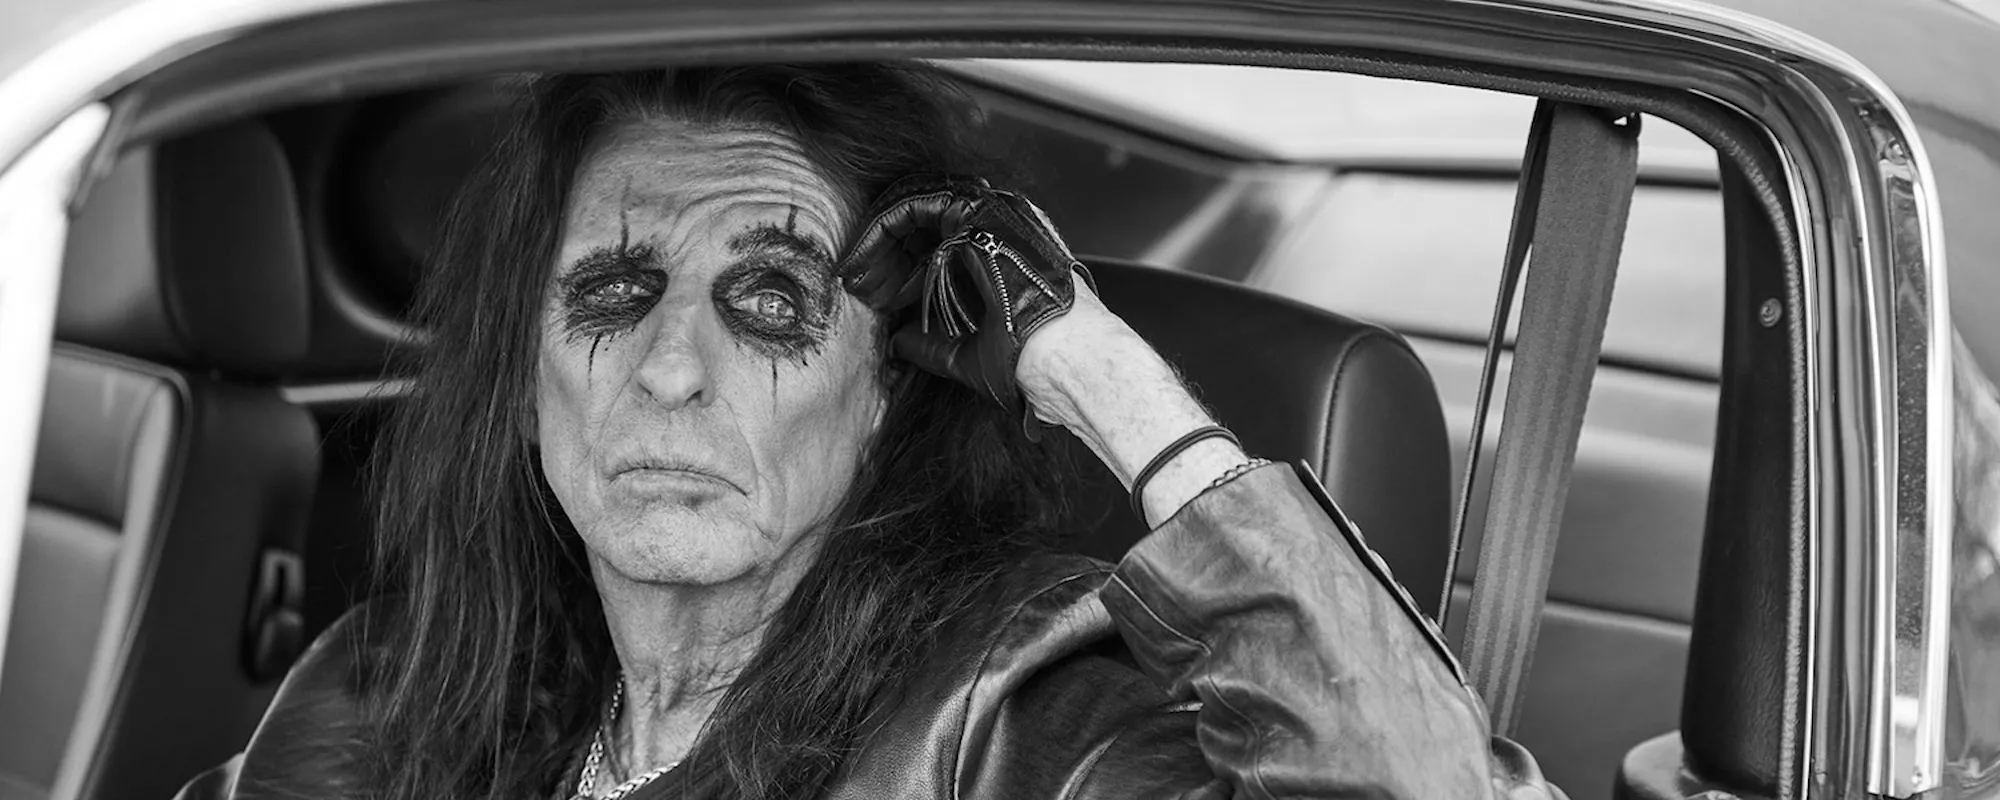 Alice Cooper Auctioning Off Signed “Poison” Artwork for Charity